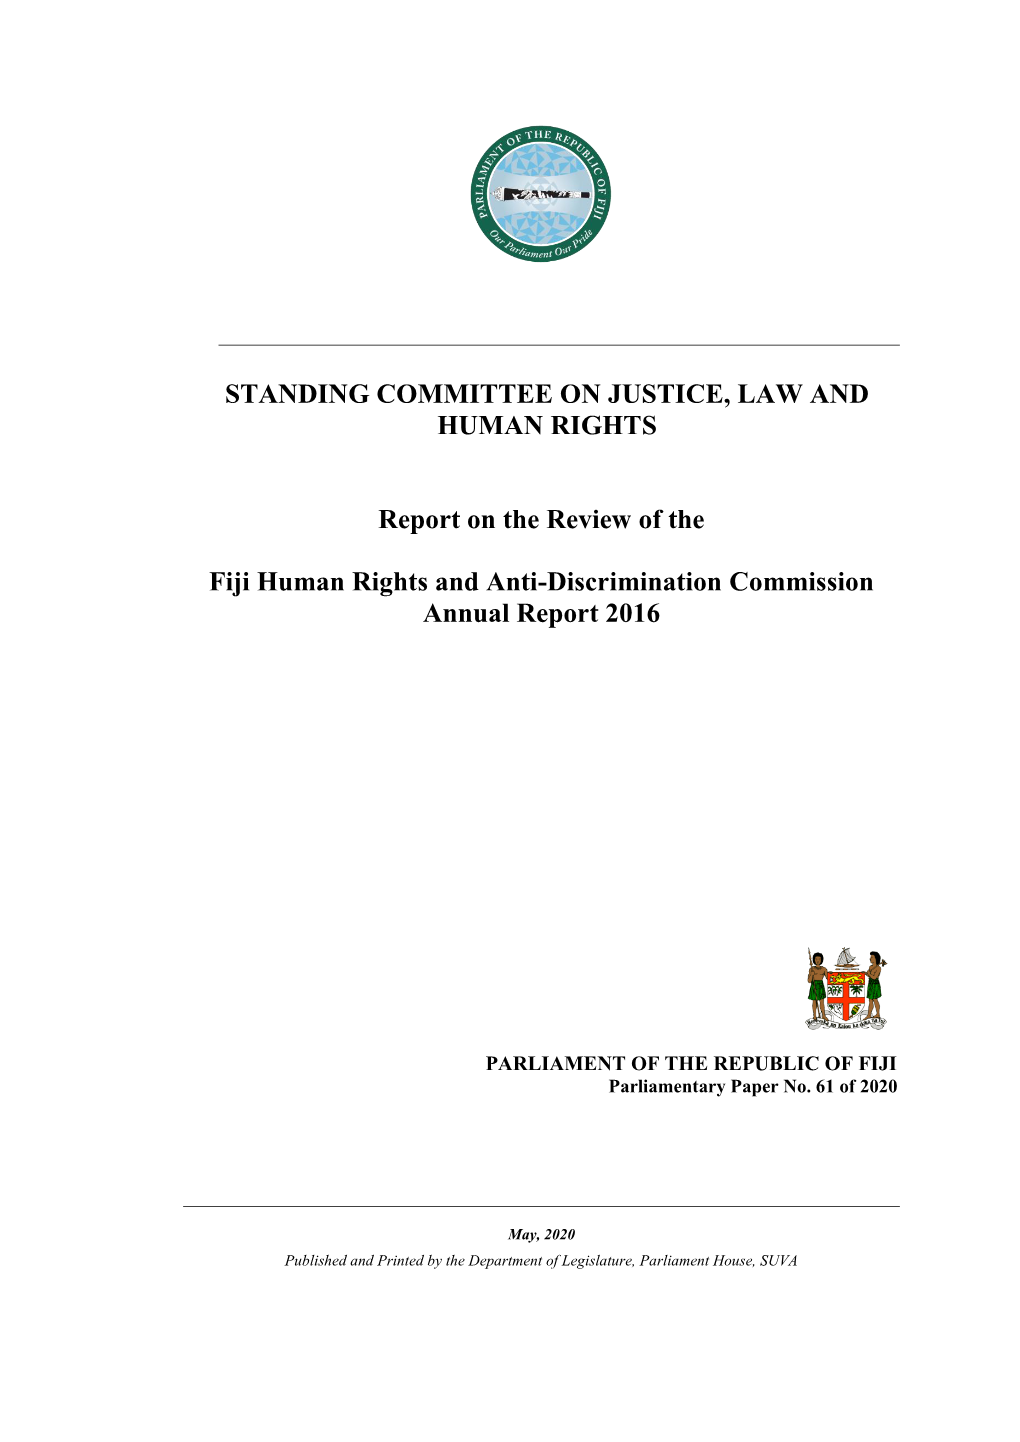 Fiji Human Rights and Anti-Discrimination Commission Annual Report 2016